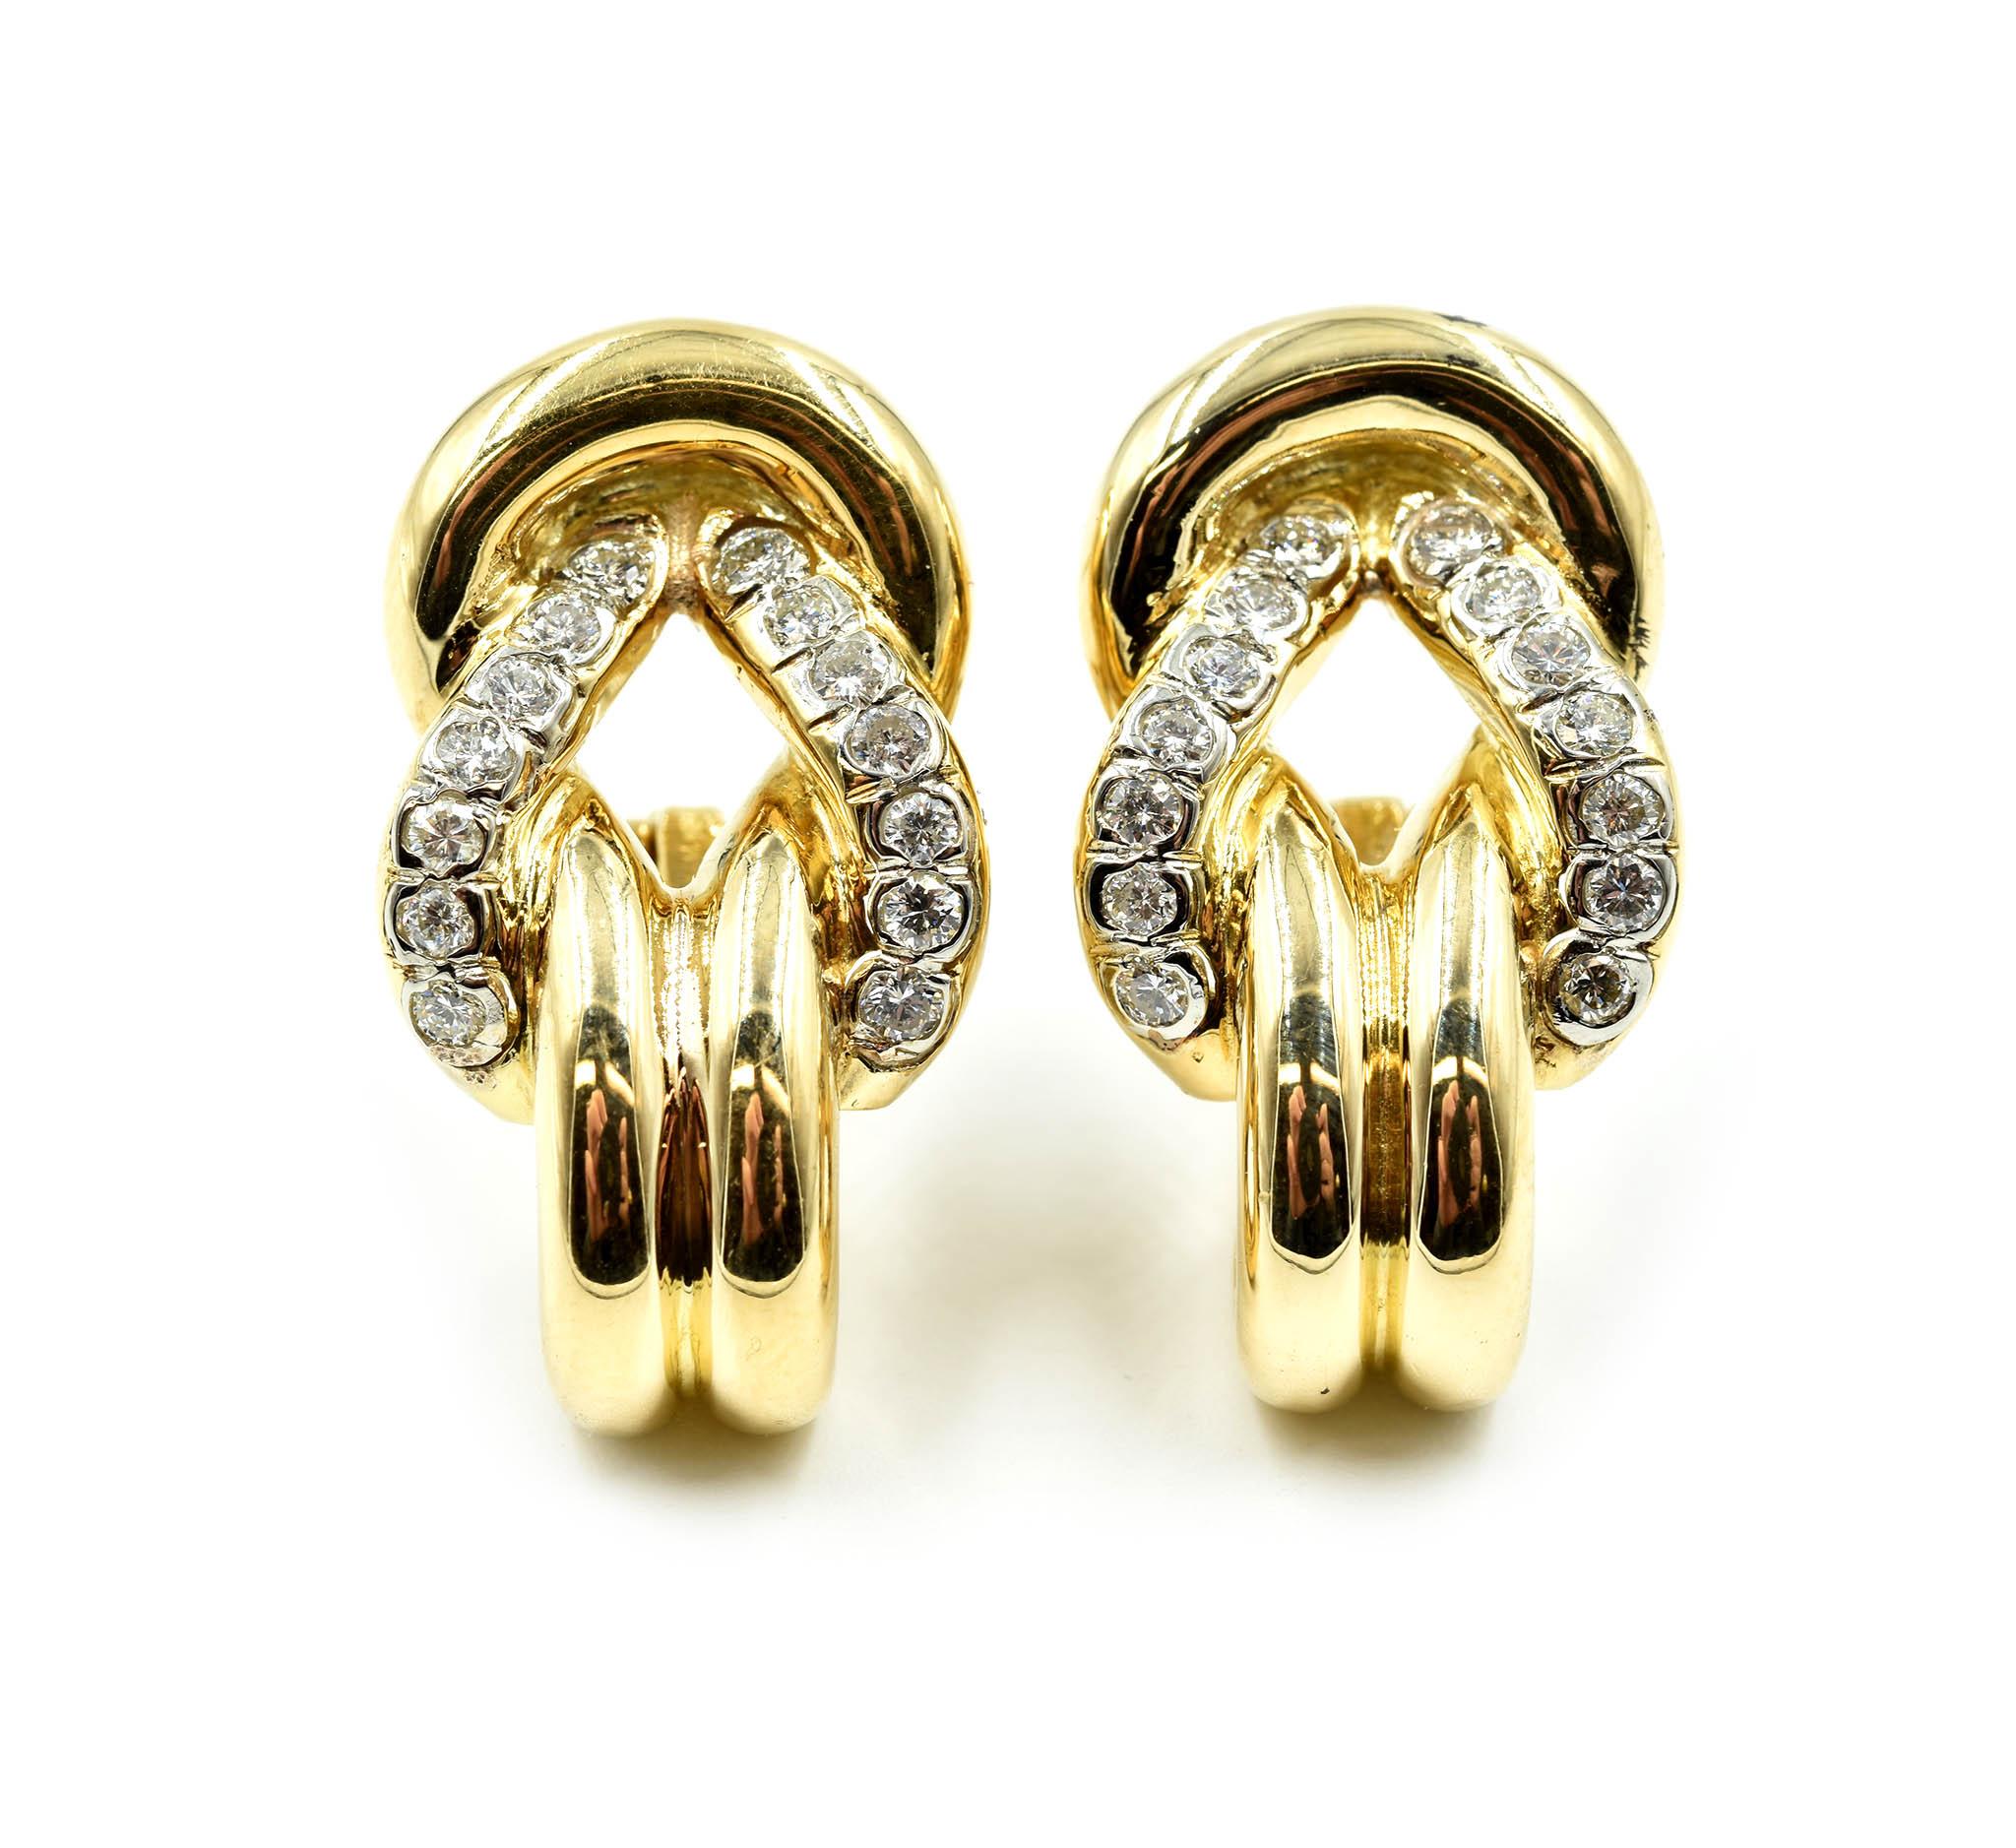 Designer: custom design
Material: 18k yellow gold
Diamonds: 28 round brilliant cuts = 0.84 carat total weight
Color: H
Clarity: SI1
Dimensions: each earring measures 1 ¼ inches long and just over 1/2 an inch wide  
Fastenings: omega backs
Weight: